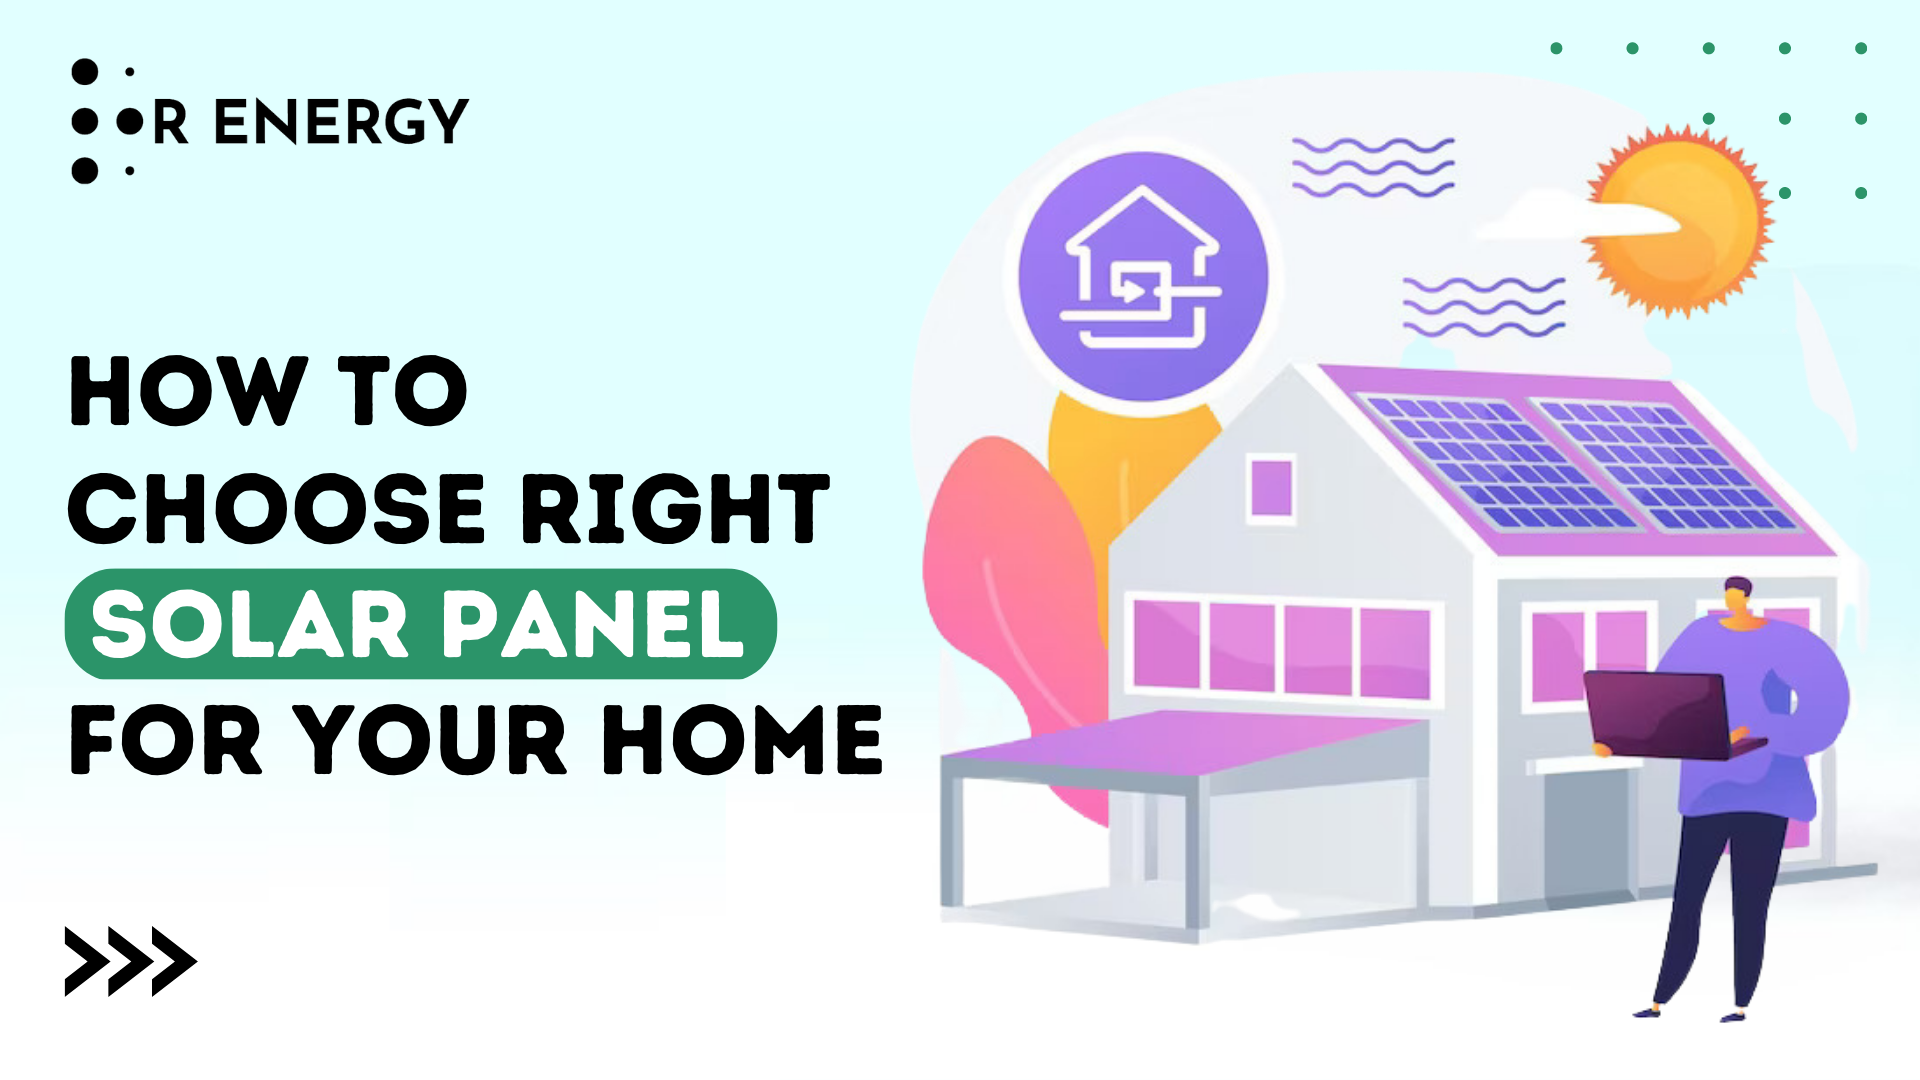 https://renergyinfo.com/how-to-choose-right-solar-panel-for-your-home/